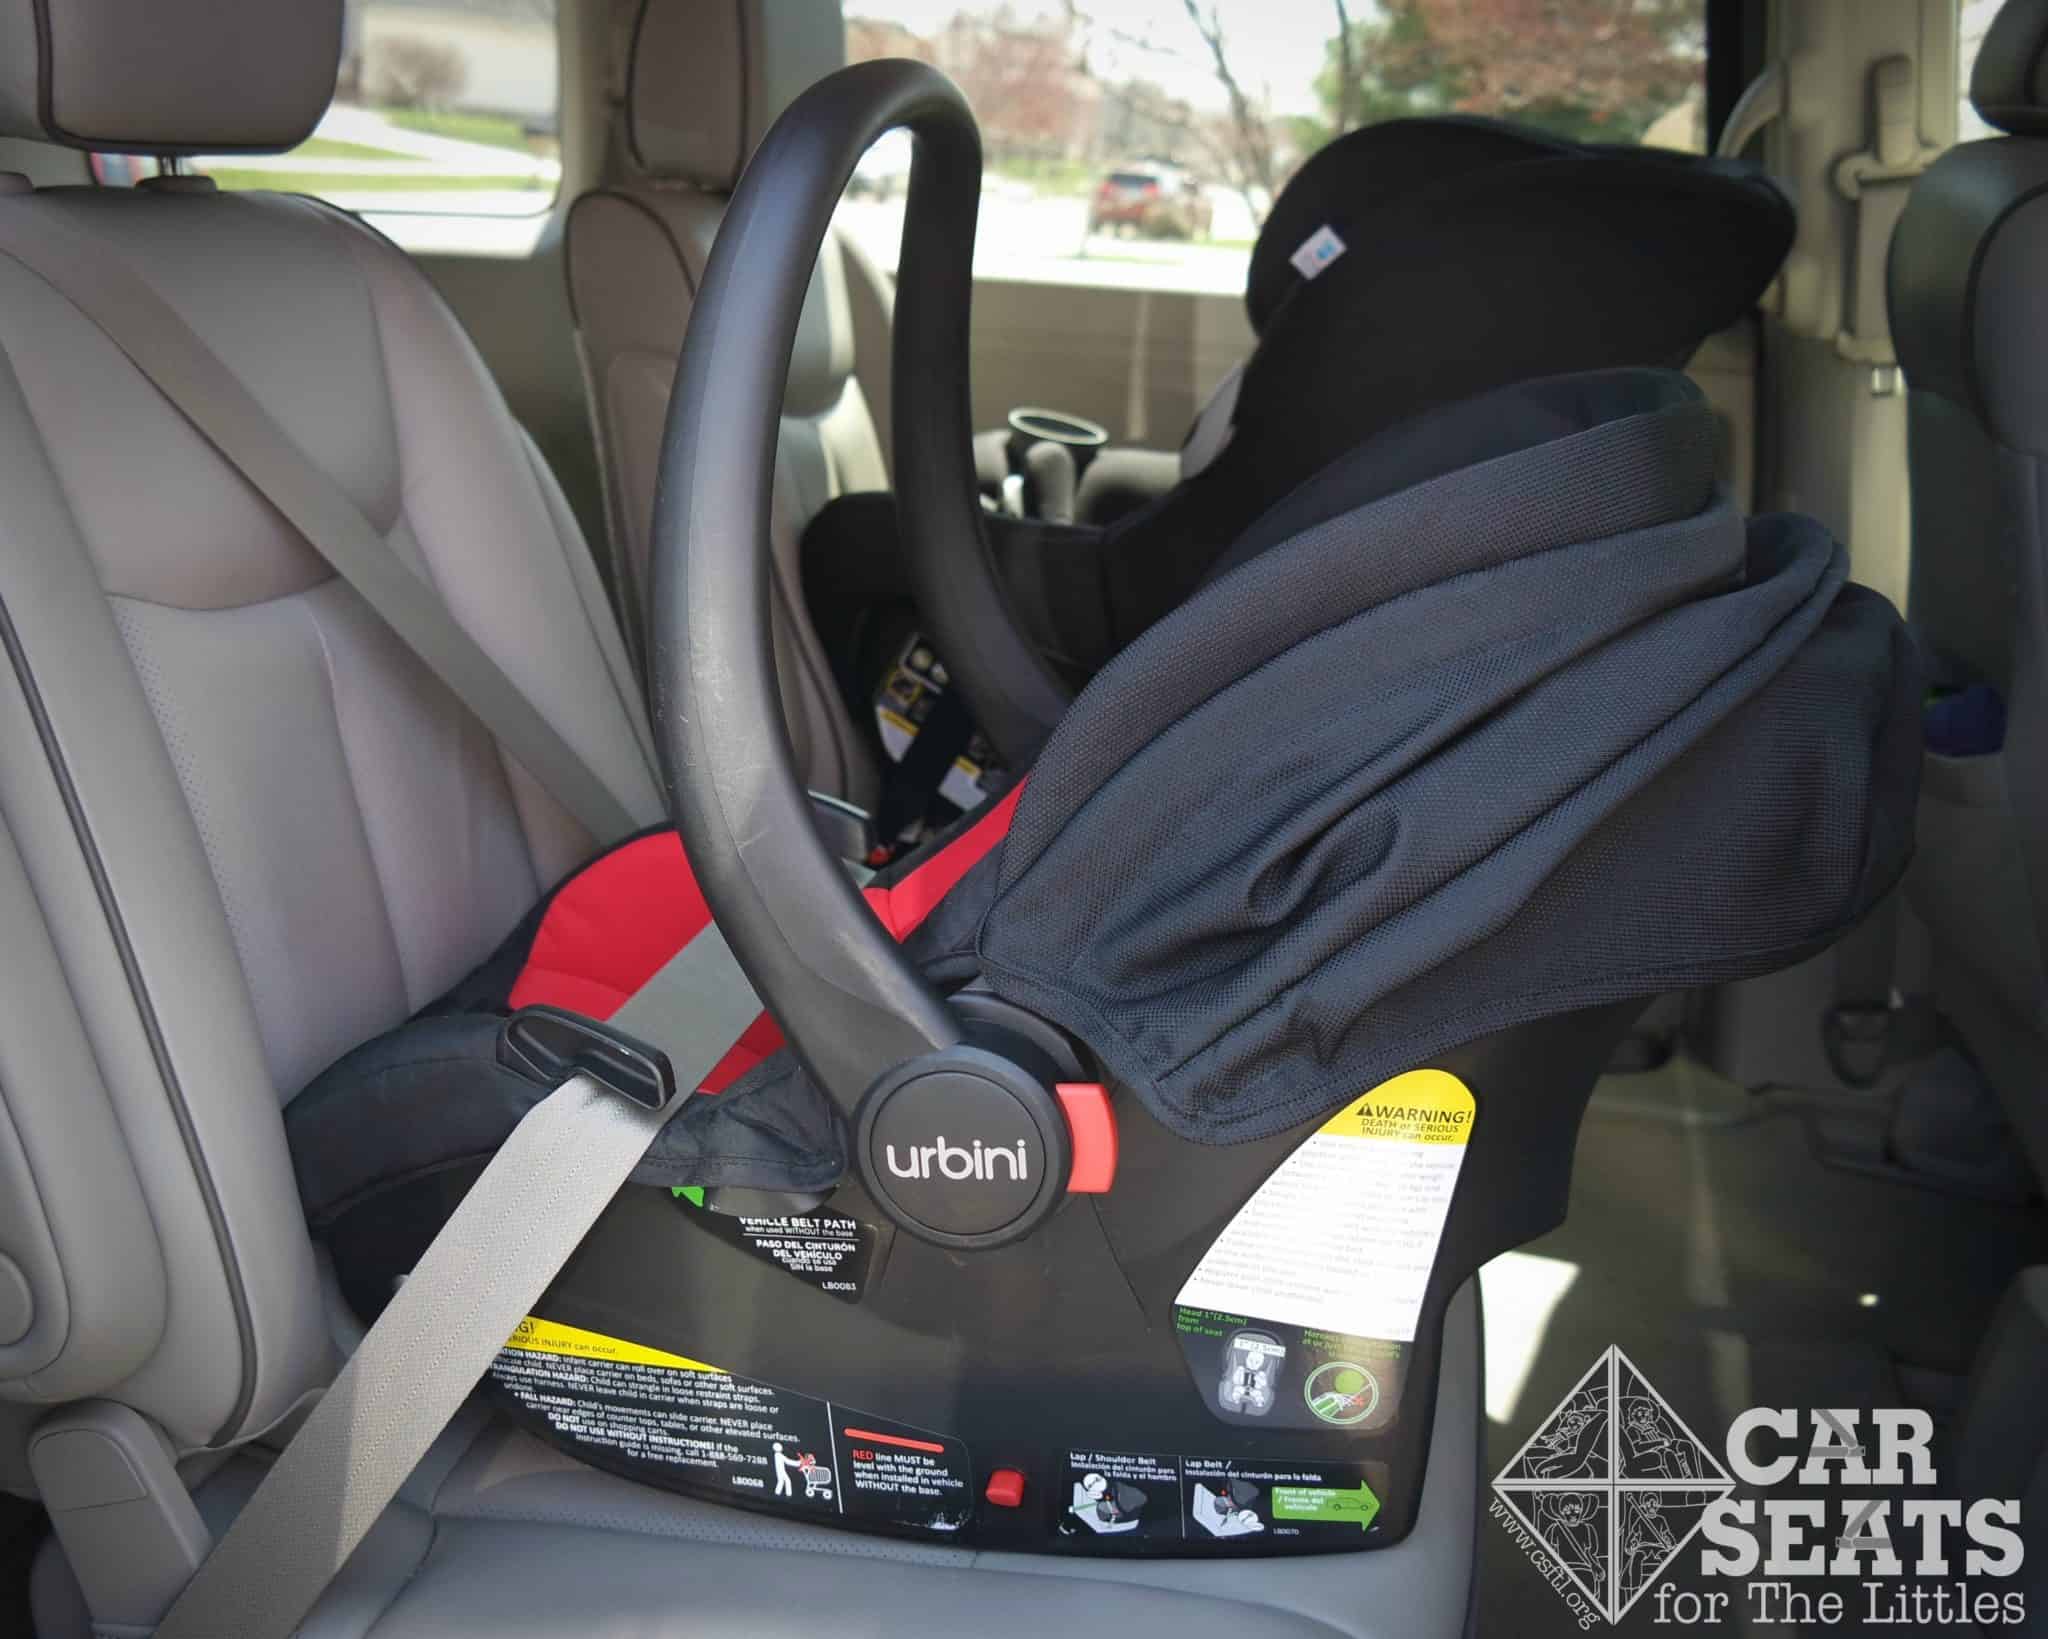 Installing A Rear Facing Only Seat Without The Base Car Seats For Littles - How To Install Rear Facing Baby Car Seat With Seatbelt